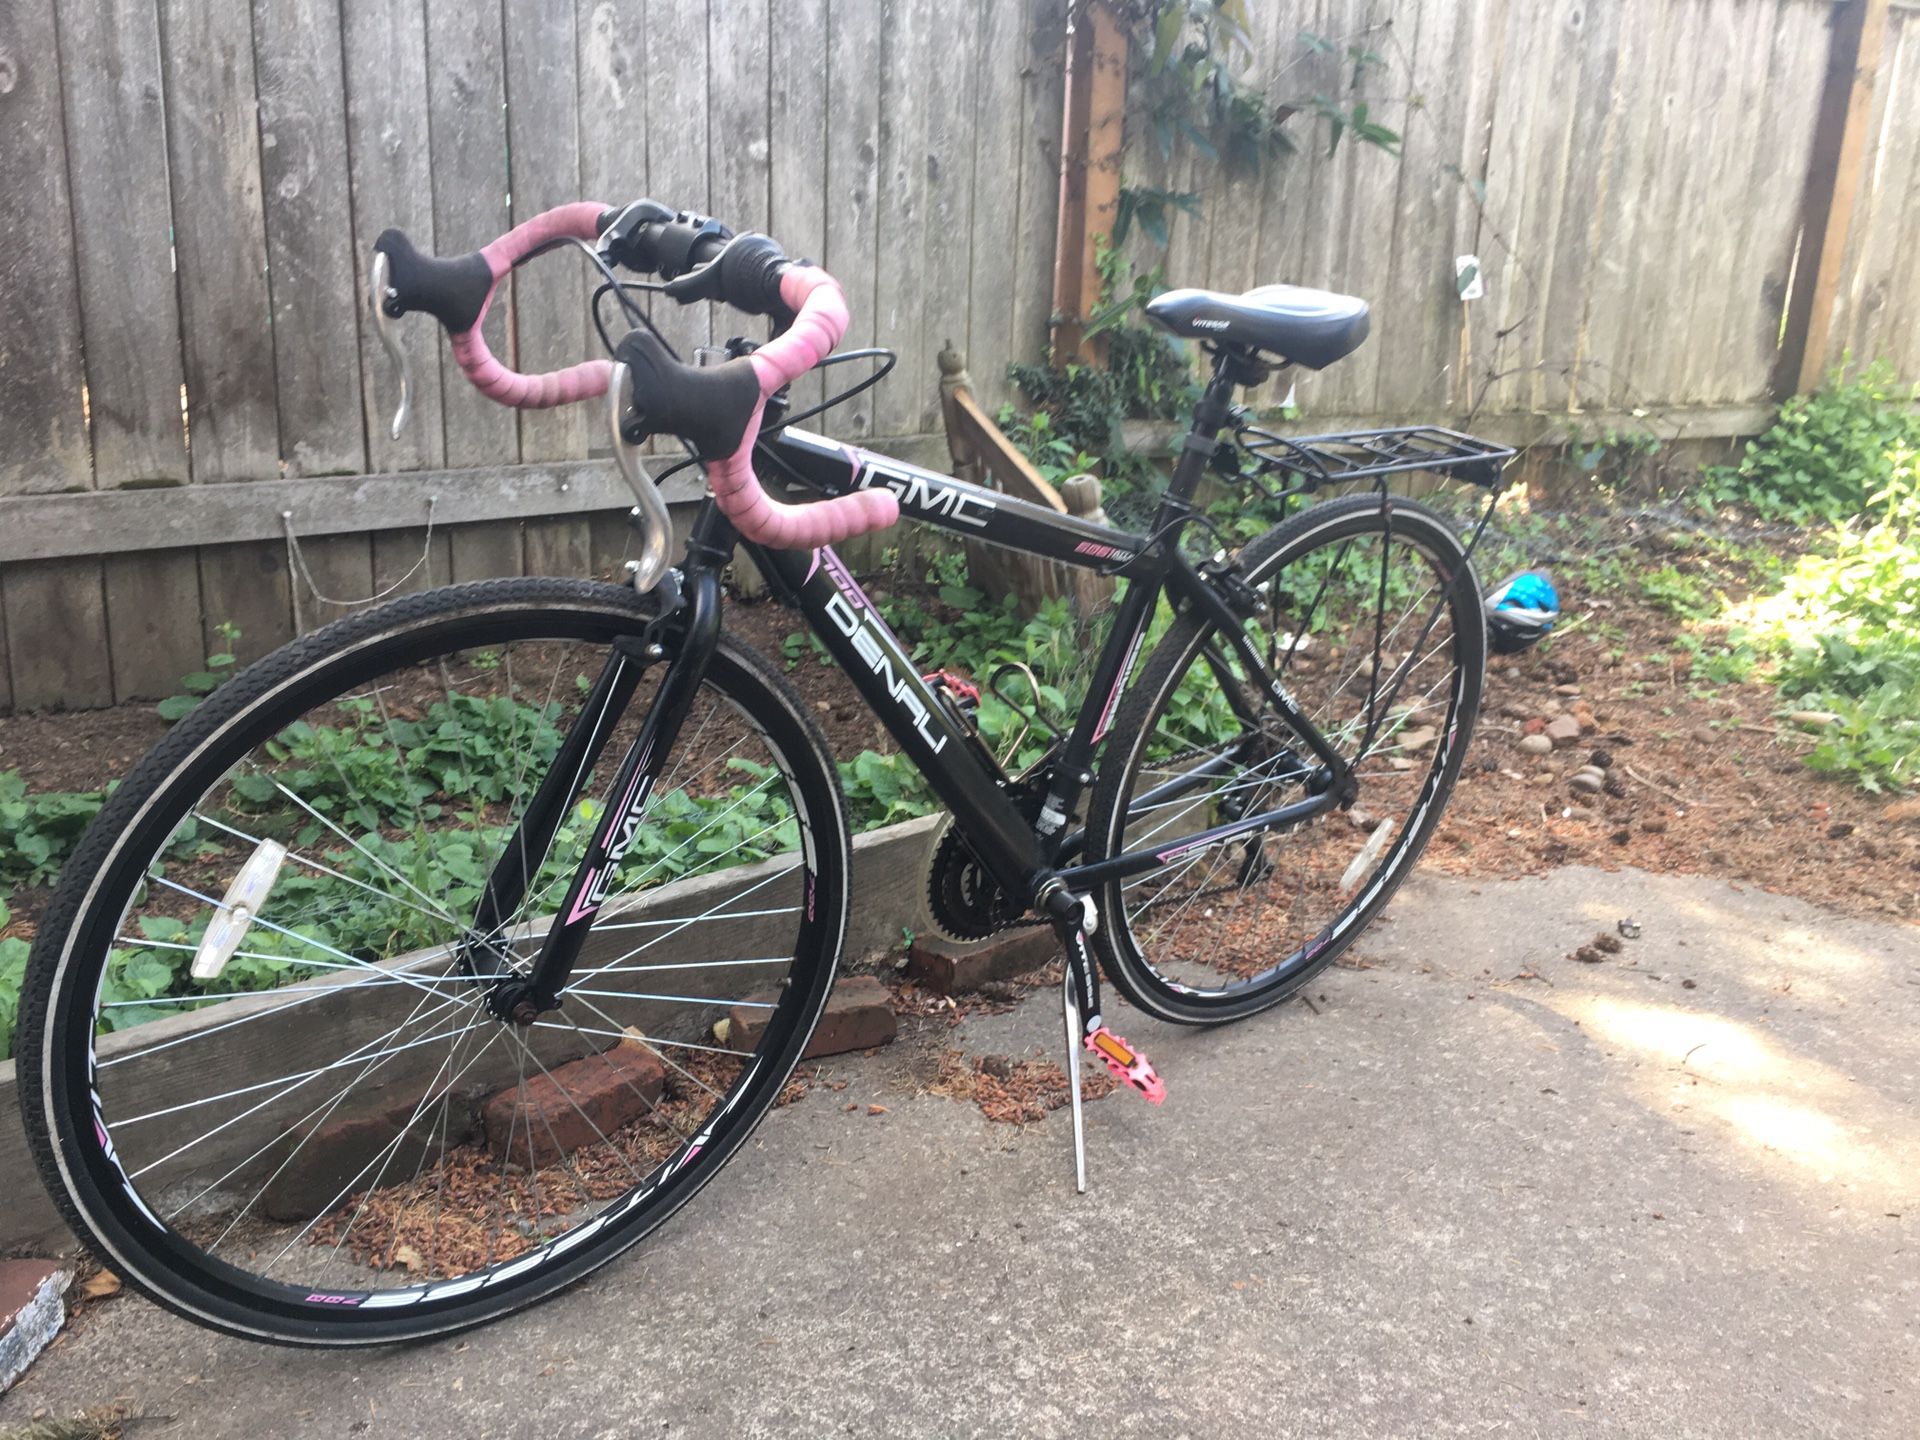 Denali road bike and get condition Been used as a commuter all gears work break everything functional and it rides great new tires must go ASAP $150